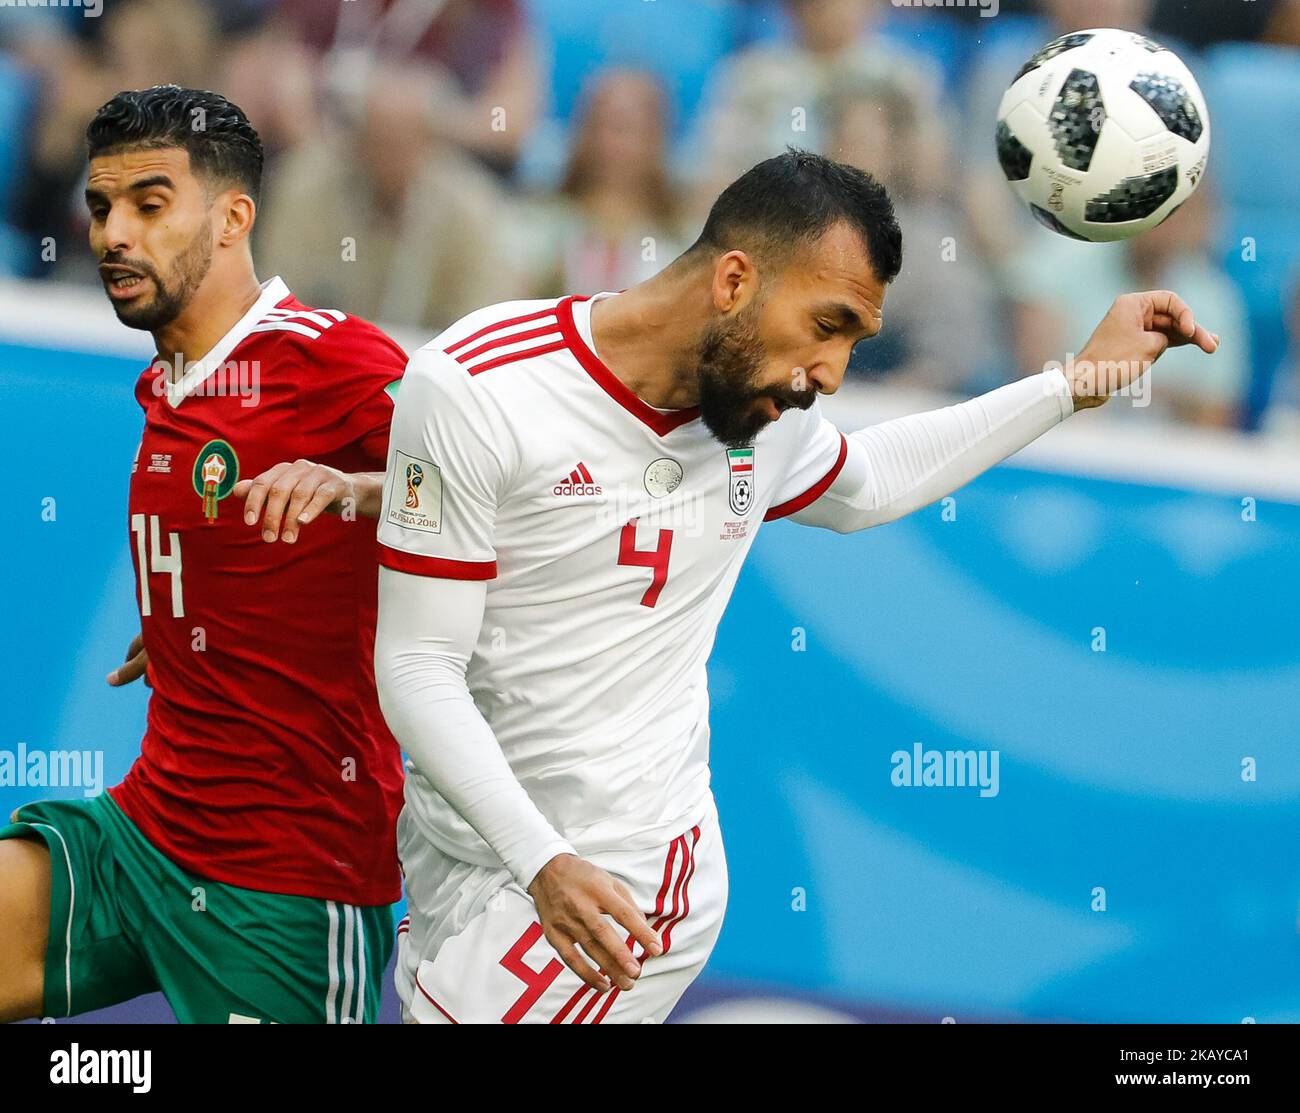 Mbark Boussoufa (L) of Morocco national team and Roozbeh Cheshmi of IR Iran national team vie for the ball during the 2018 FIFA World Cup Russia Group B match between Morocco and IR Iran on June 15, 2018 at Saint Petersburg Stadium in Saint Petersburg, Russia. (Photo by Mike Kireev/NurPhoto) Stock Photo